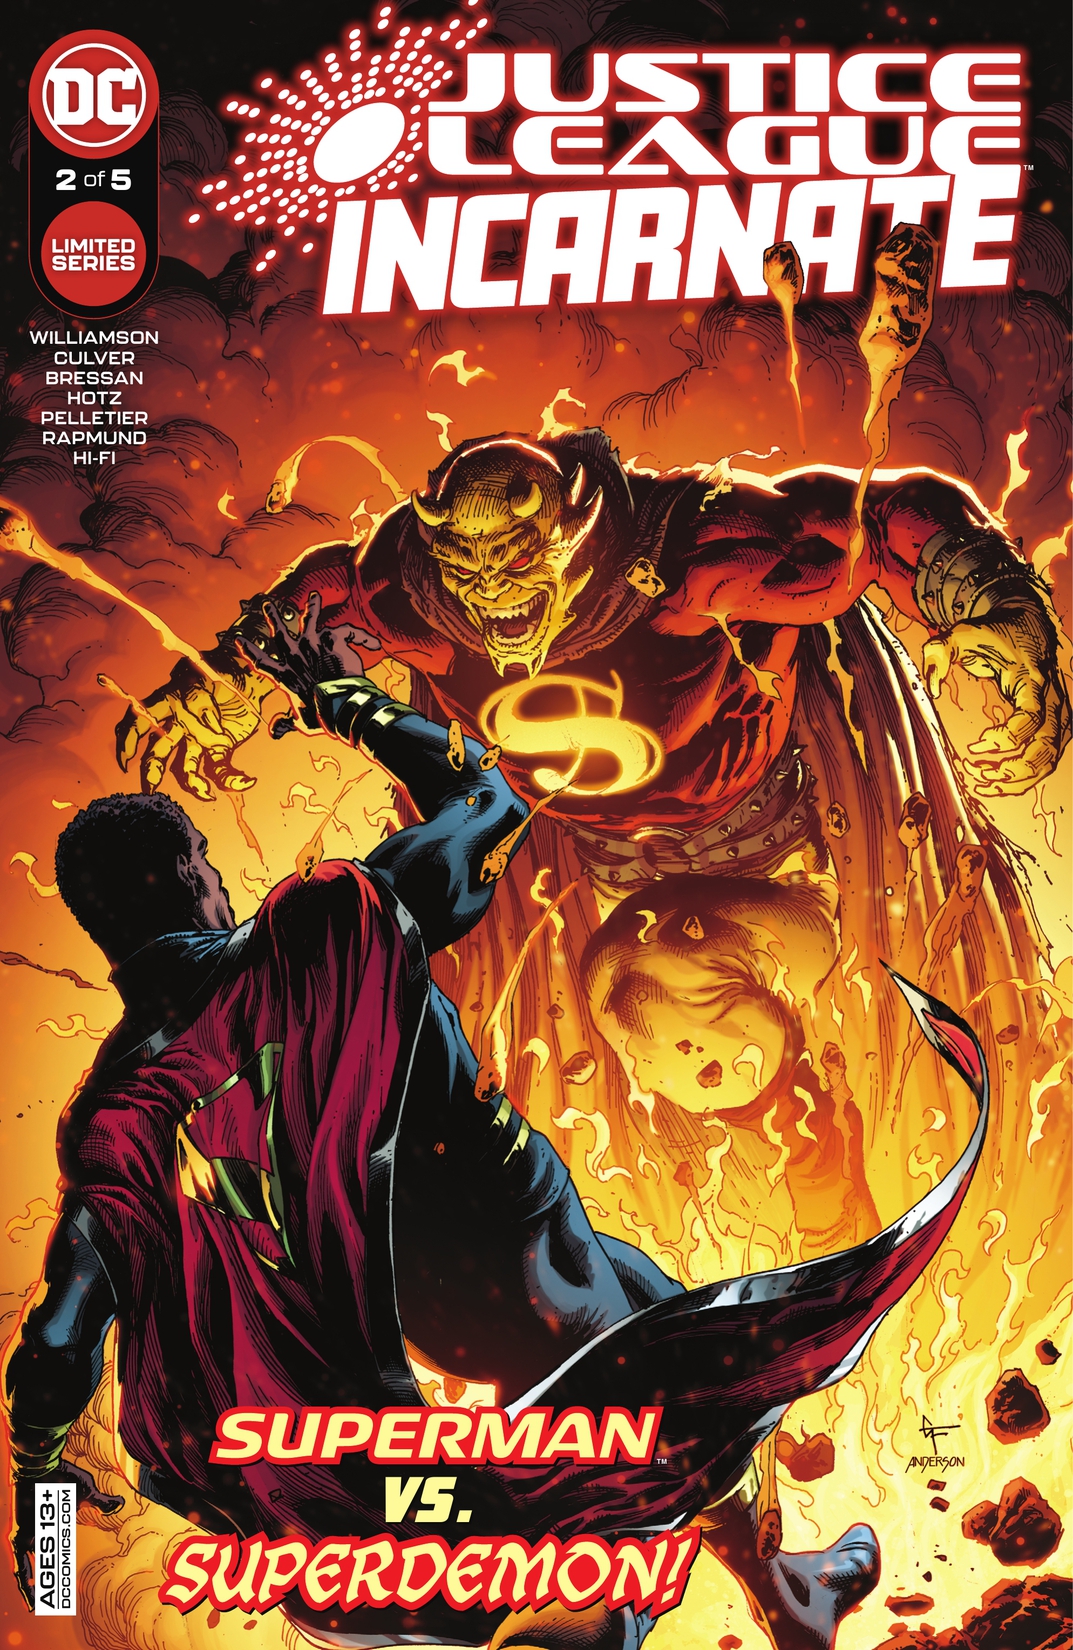 Justice League Incarnate #2 preview images